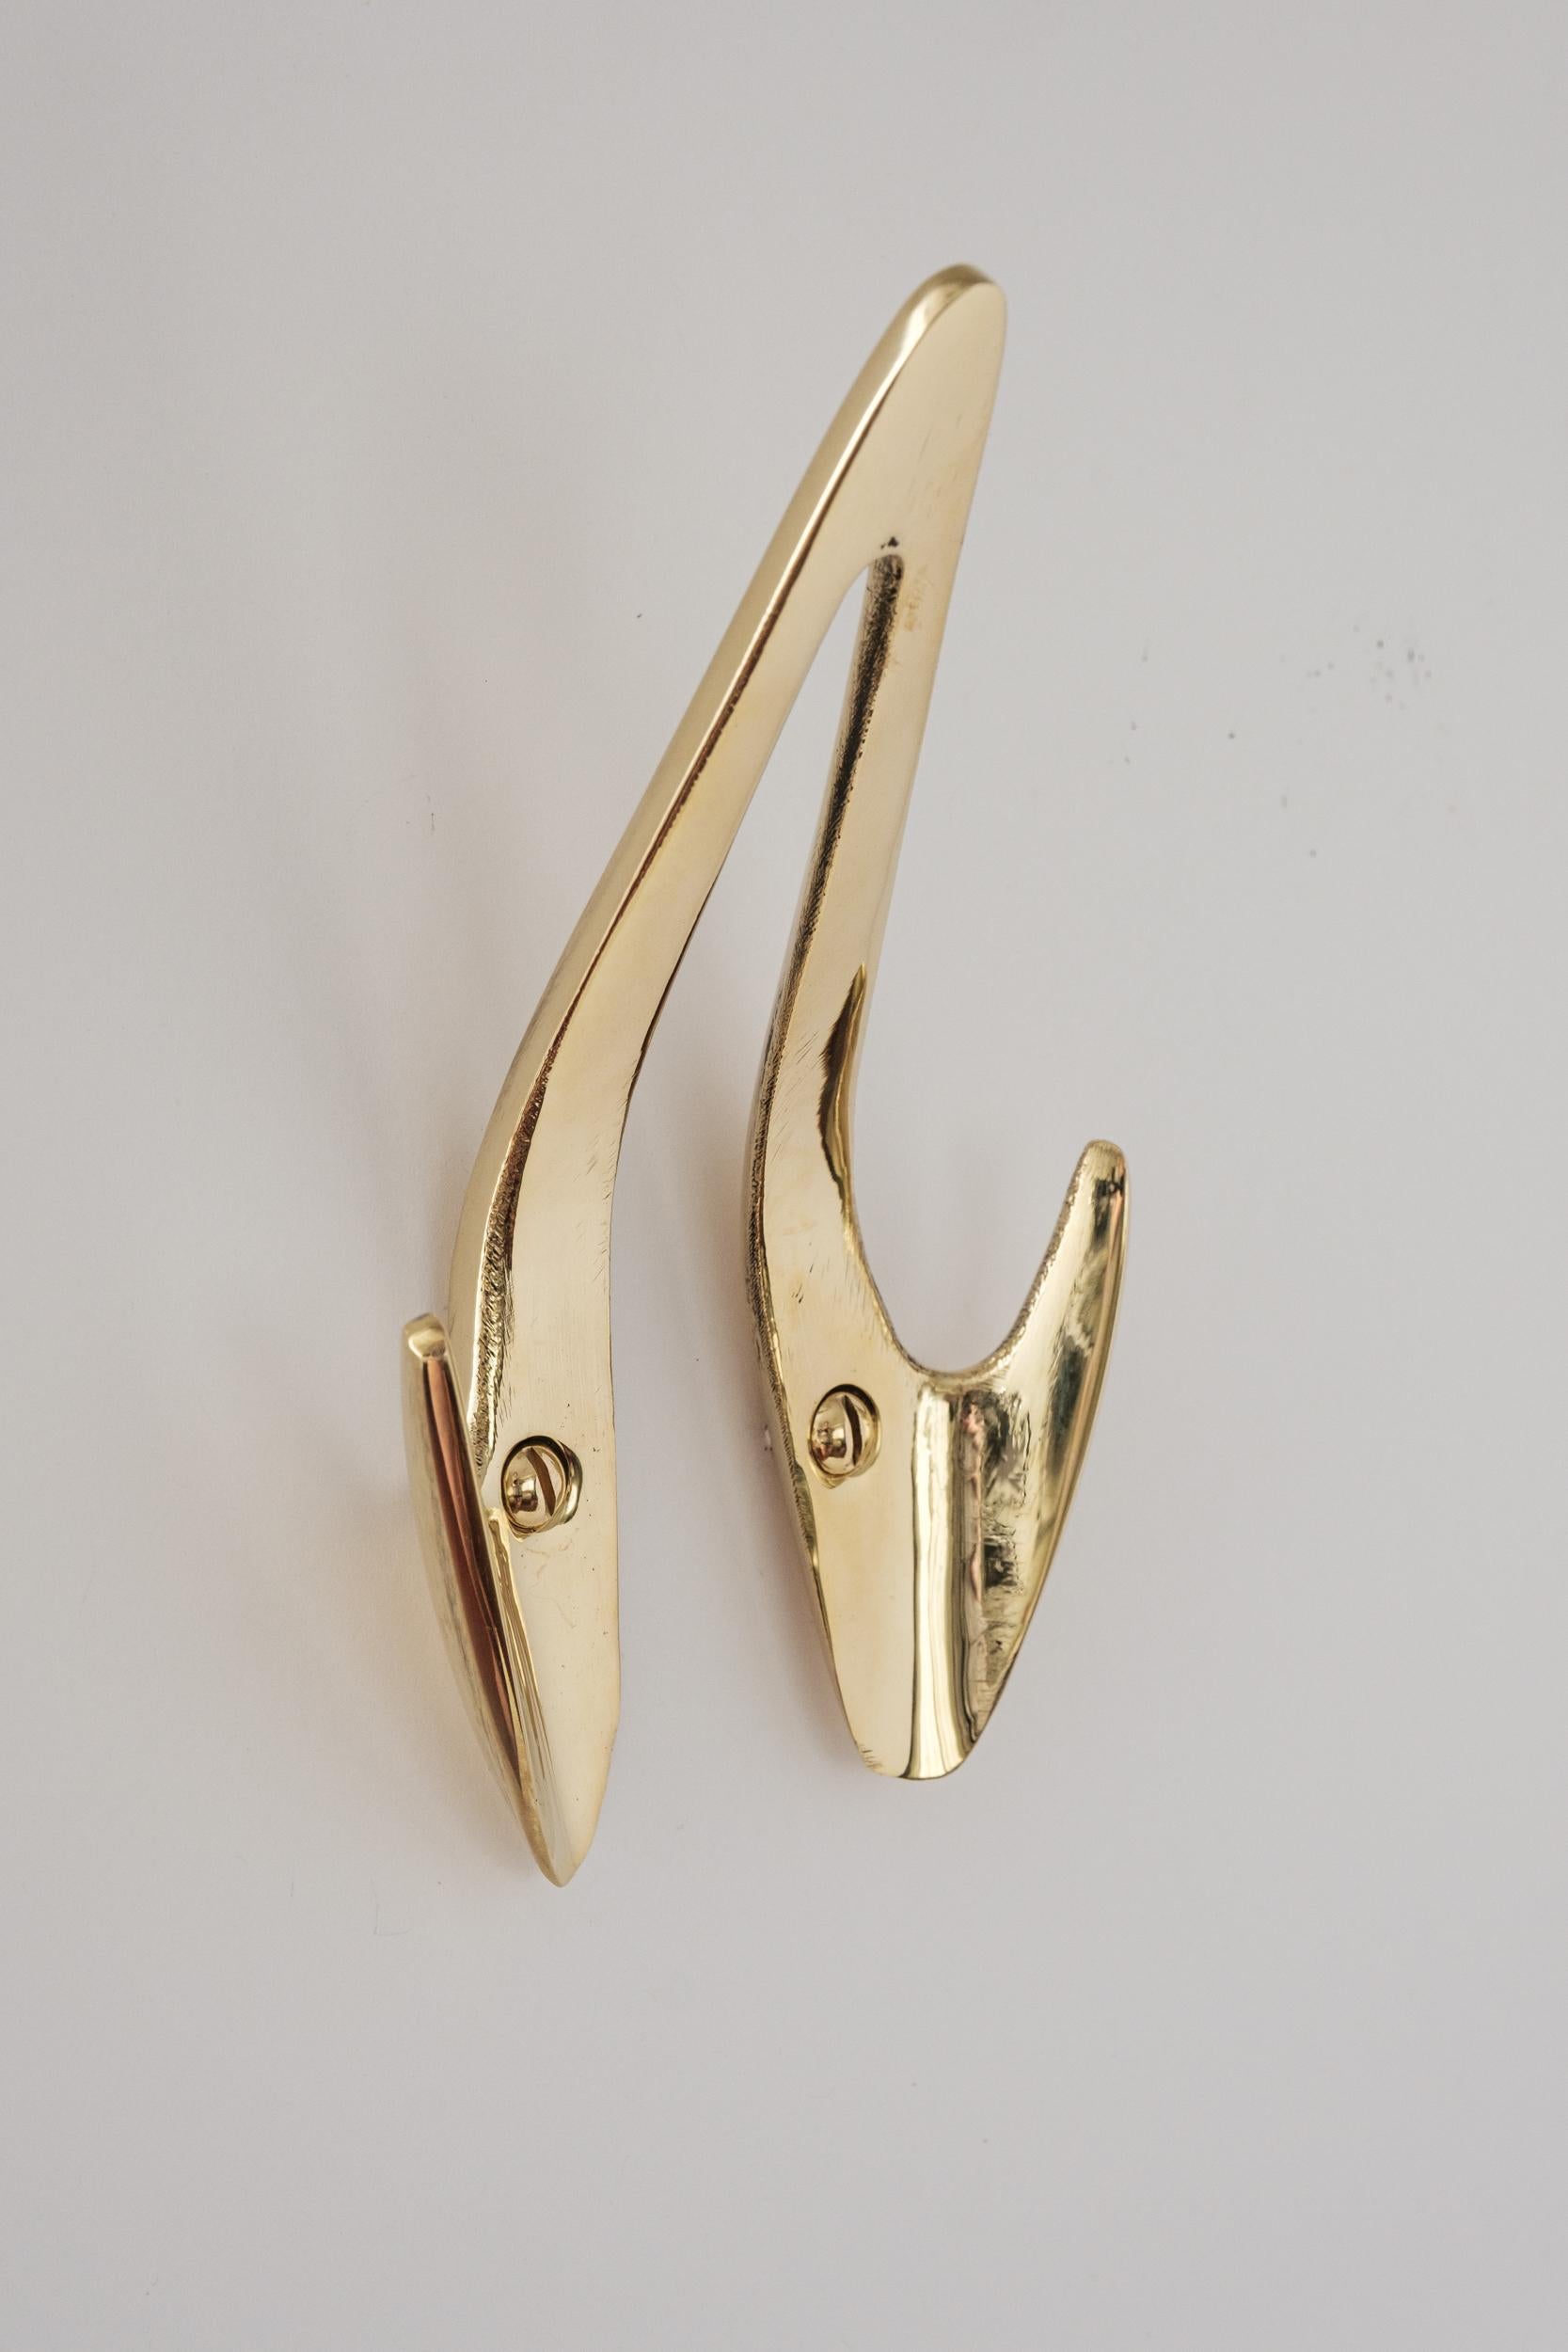 Carl Auböck Model #4994 polished brass hook. Designed in the 1950s, this versatile and Minimalist Viennese hook is executed in polished brass by Werkstätte Carl Auböck, Austria. 

Produced by Carl Auböck IV in the original Auböck workshop in the 7th